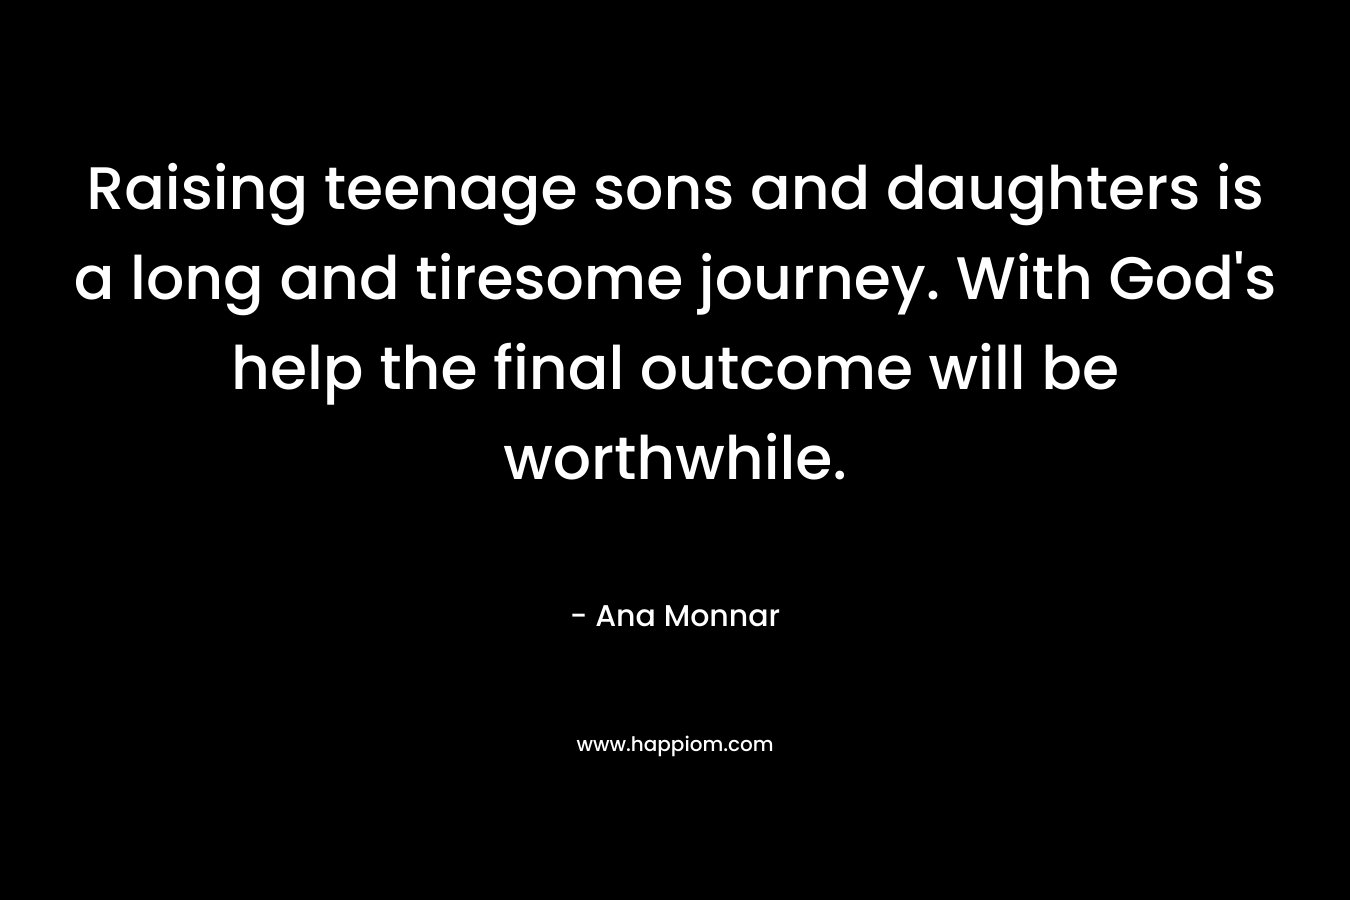 Raising teenage sons and daughters is a long and tiresome journey. With God's help the final outcome will be worthwhile.